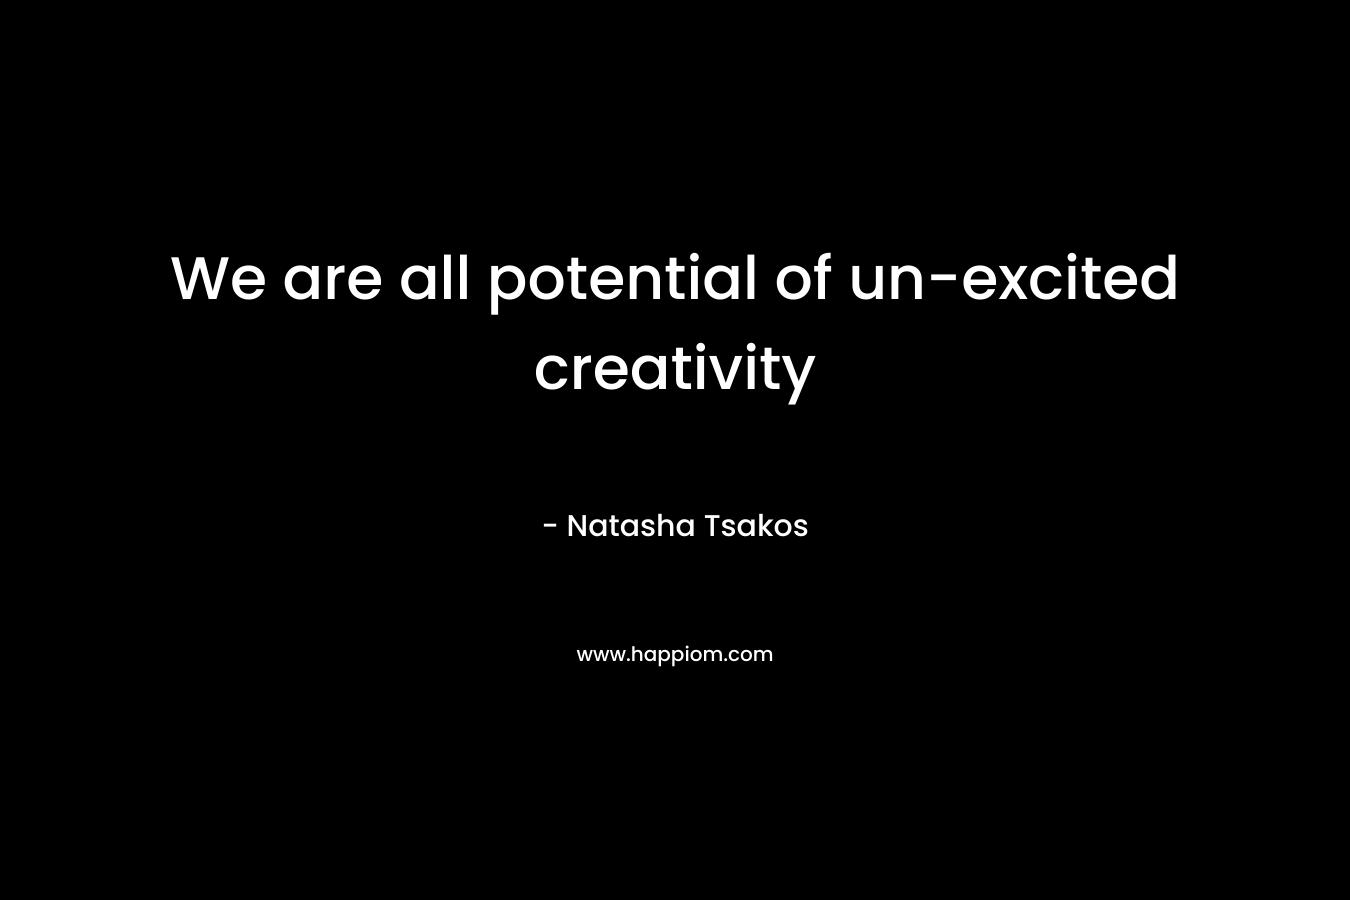 We are all potential of un-excited creativity